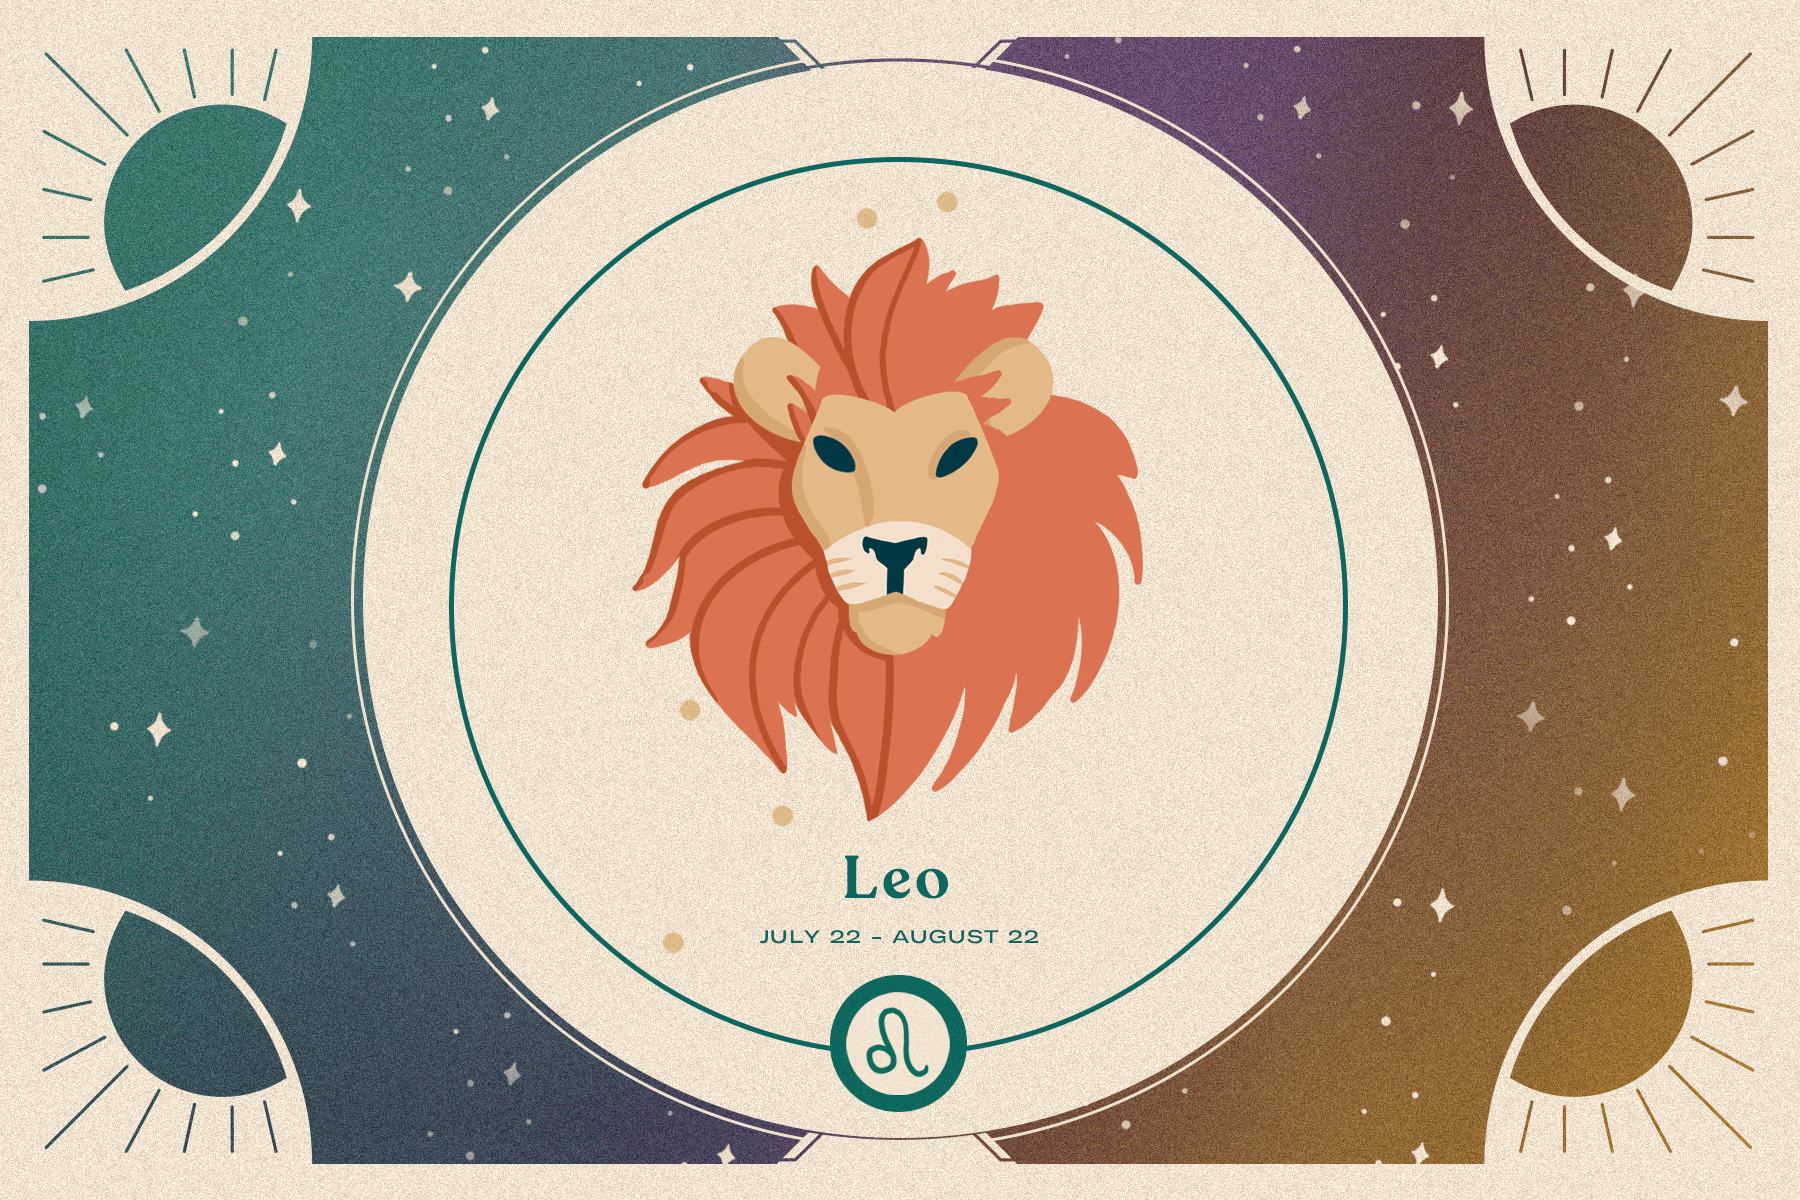 LEO Weekly Horoscope (March 15 - 21): Prediction for Love, Money, Career and Health